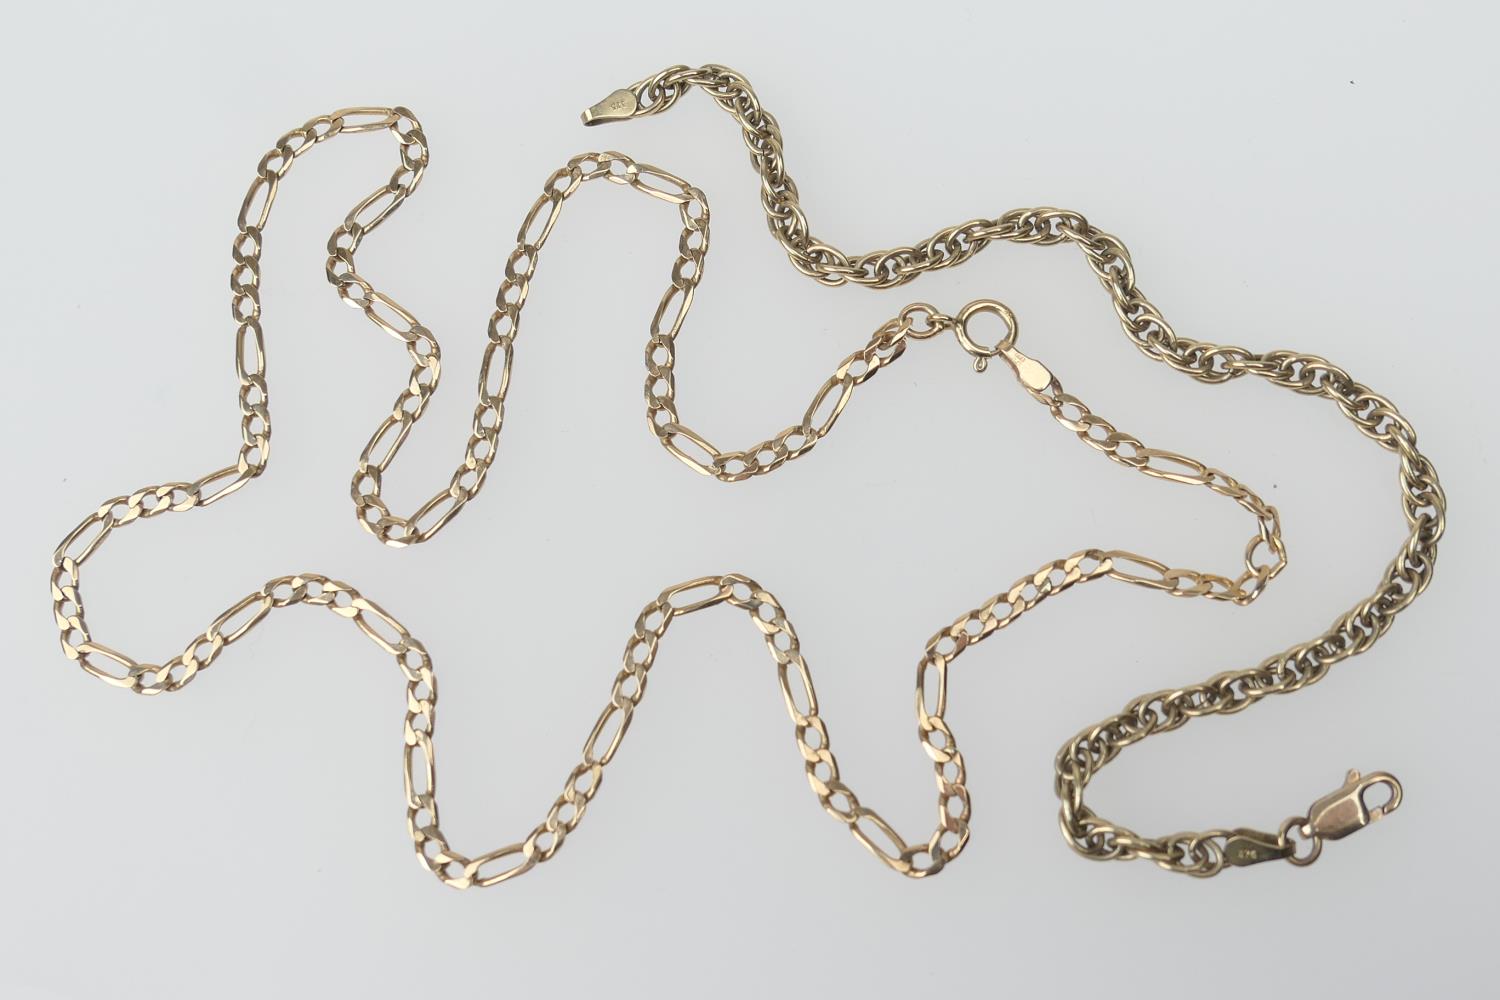 9ct gold chain link bracelet, with lobster claw clasp, length 20cm, also a 9ct gold figaro linked